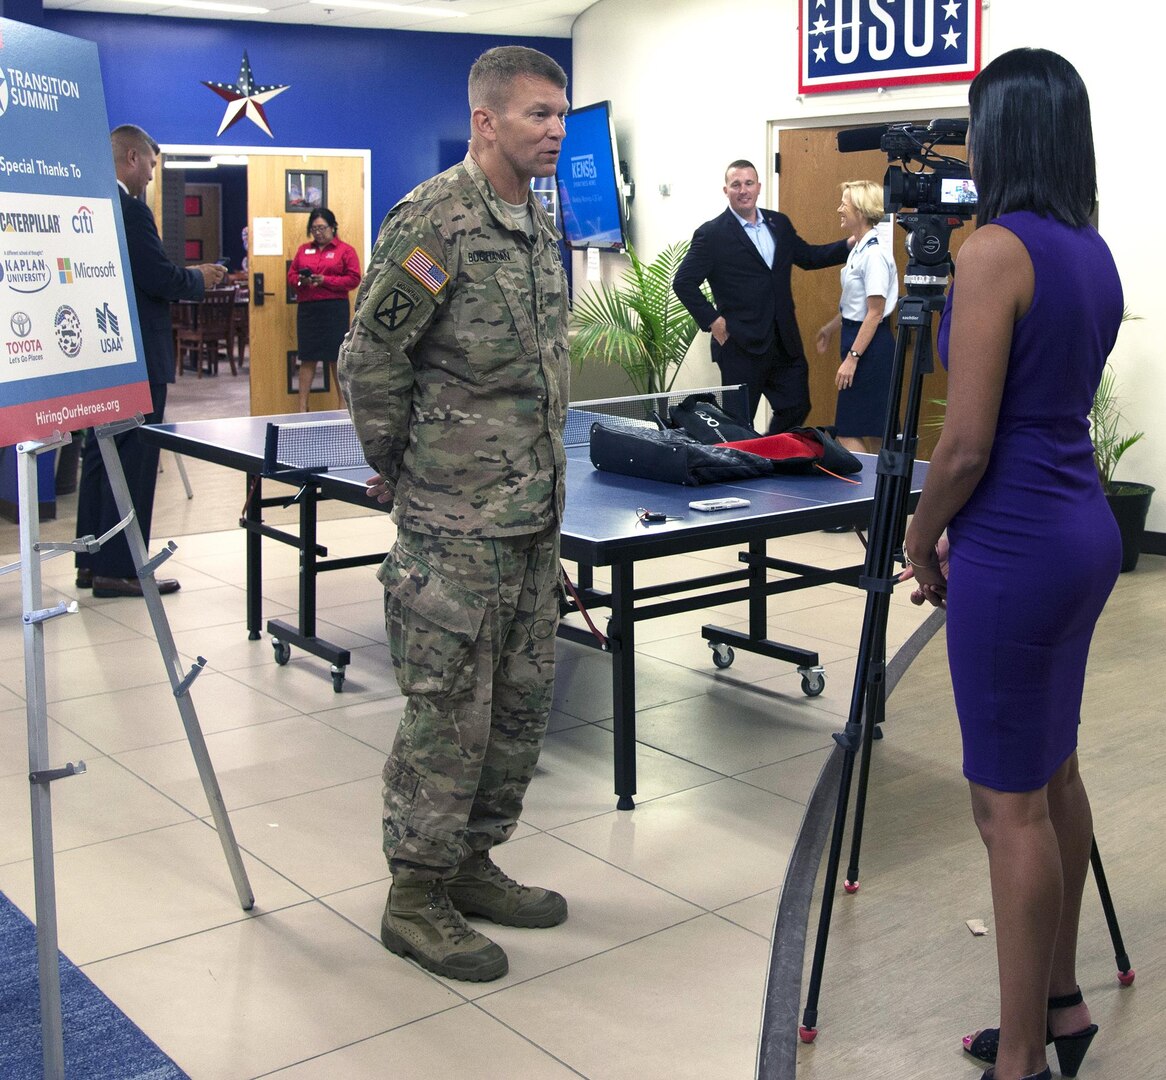 Lt. Gen. Jeffrey Buchanan (left), U.S. Army North (Fifth Army) commanding general, is interviewed by a reporter from a local television station during the transition summit and job fair at the Fort Sam Houston Community Center at Joint Base San Antonio-Fort Sam Houston July 13.